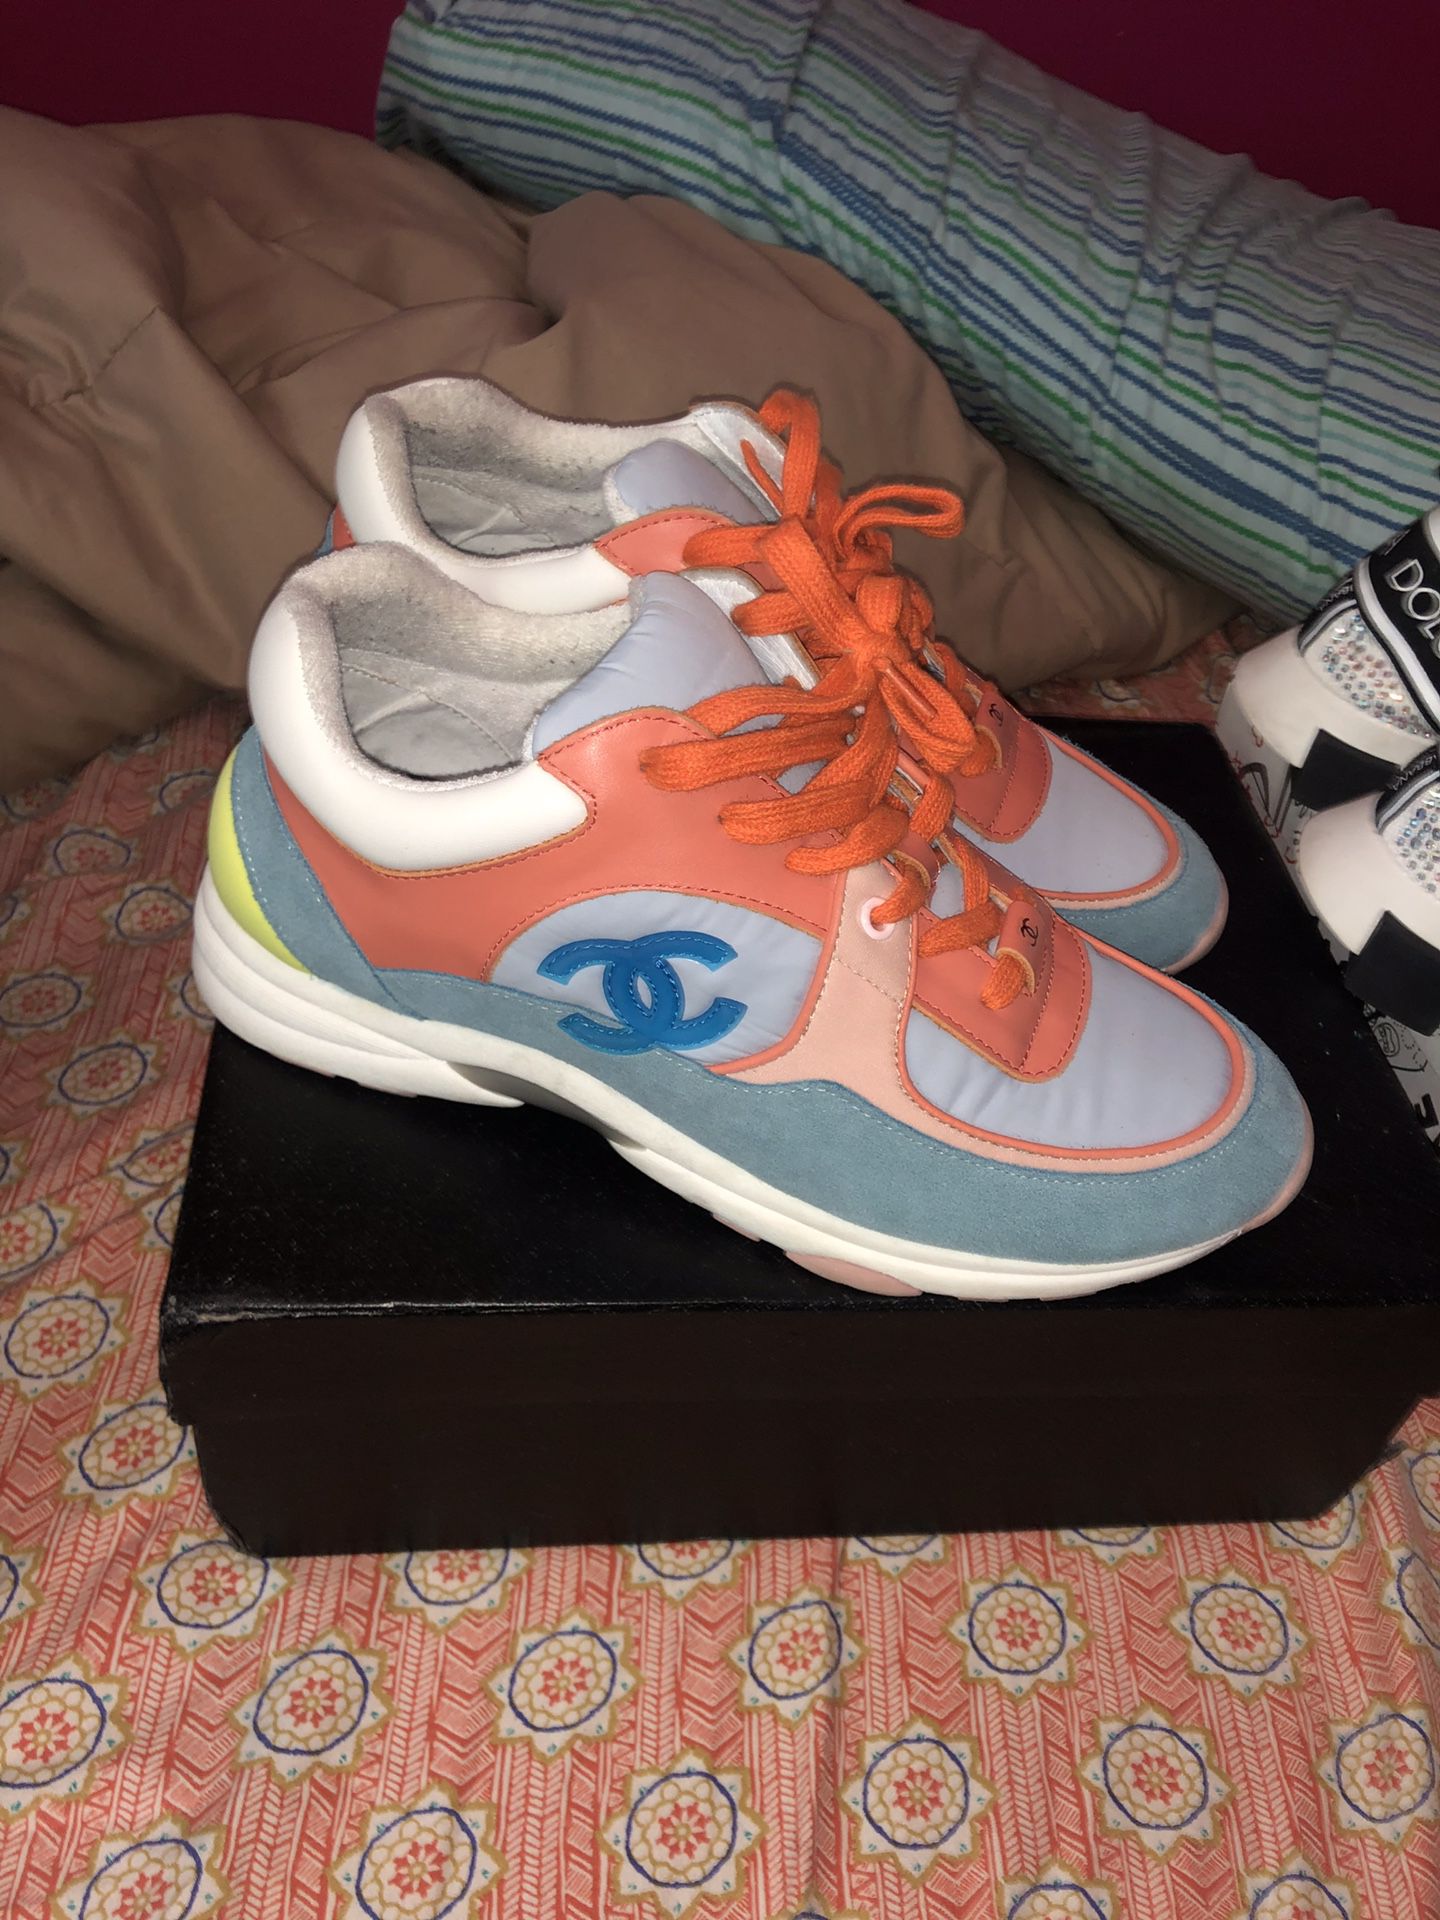 Chanel Trainers Sneakers Size 41/8